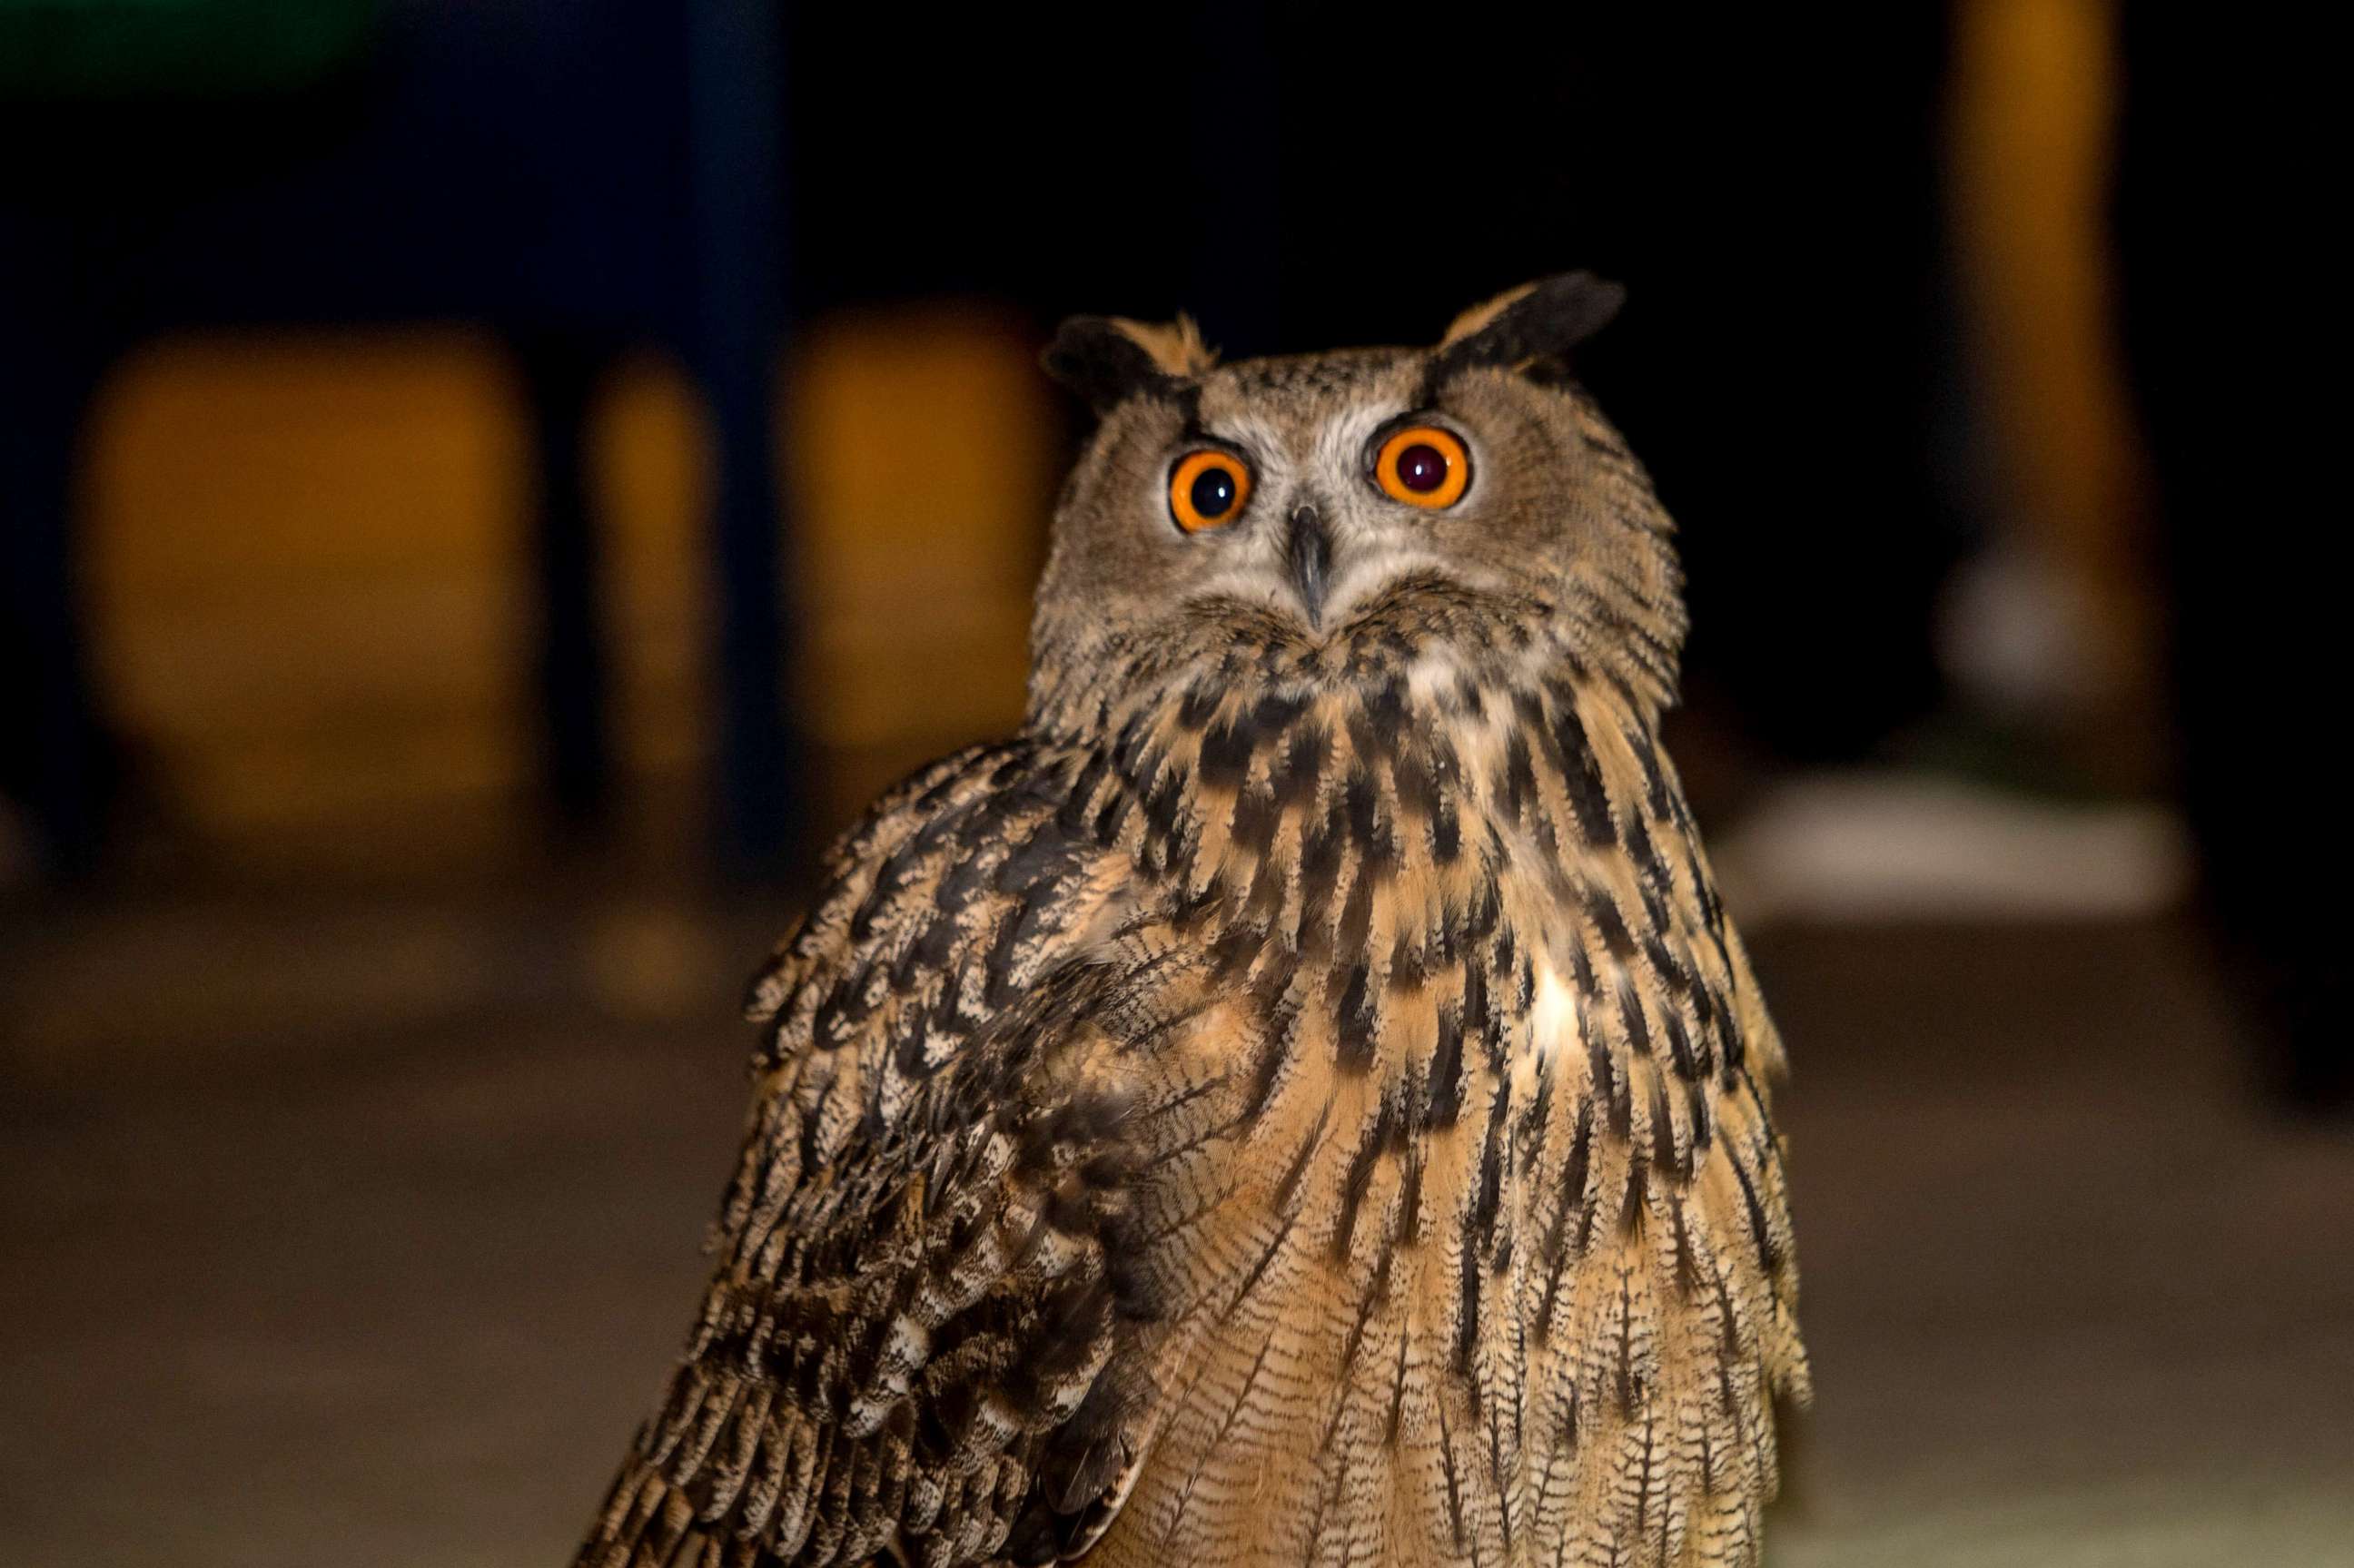 PHOTO: The New York City Mayor's Office released an image of a Eurasian eagle owl that escaped from the Central Park Zoo after its exhibit was vandalized.